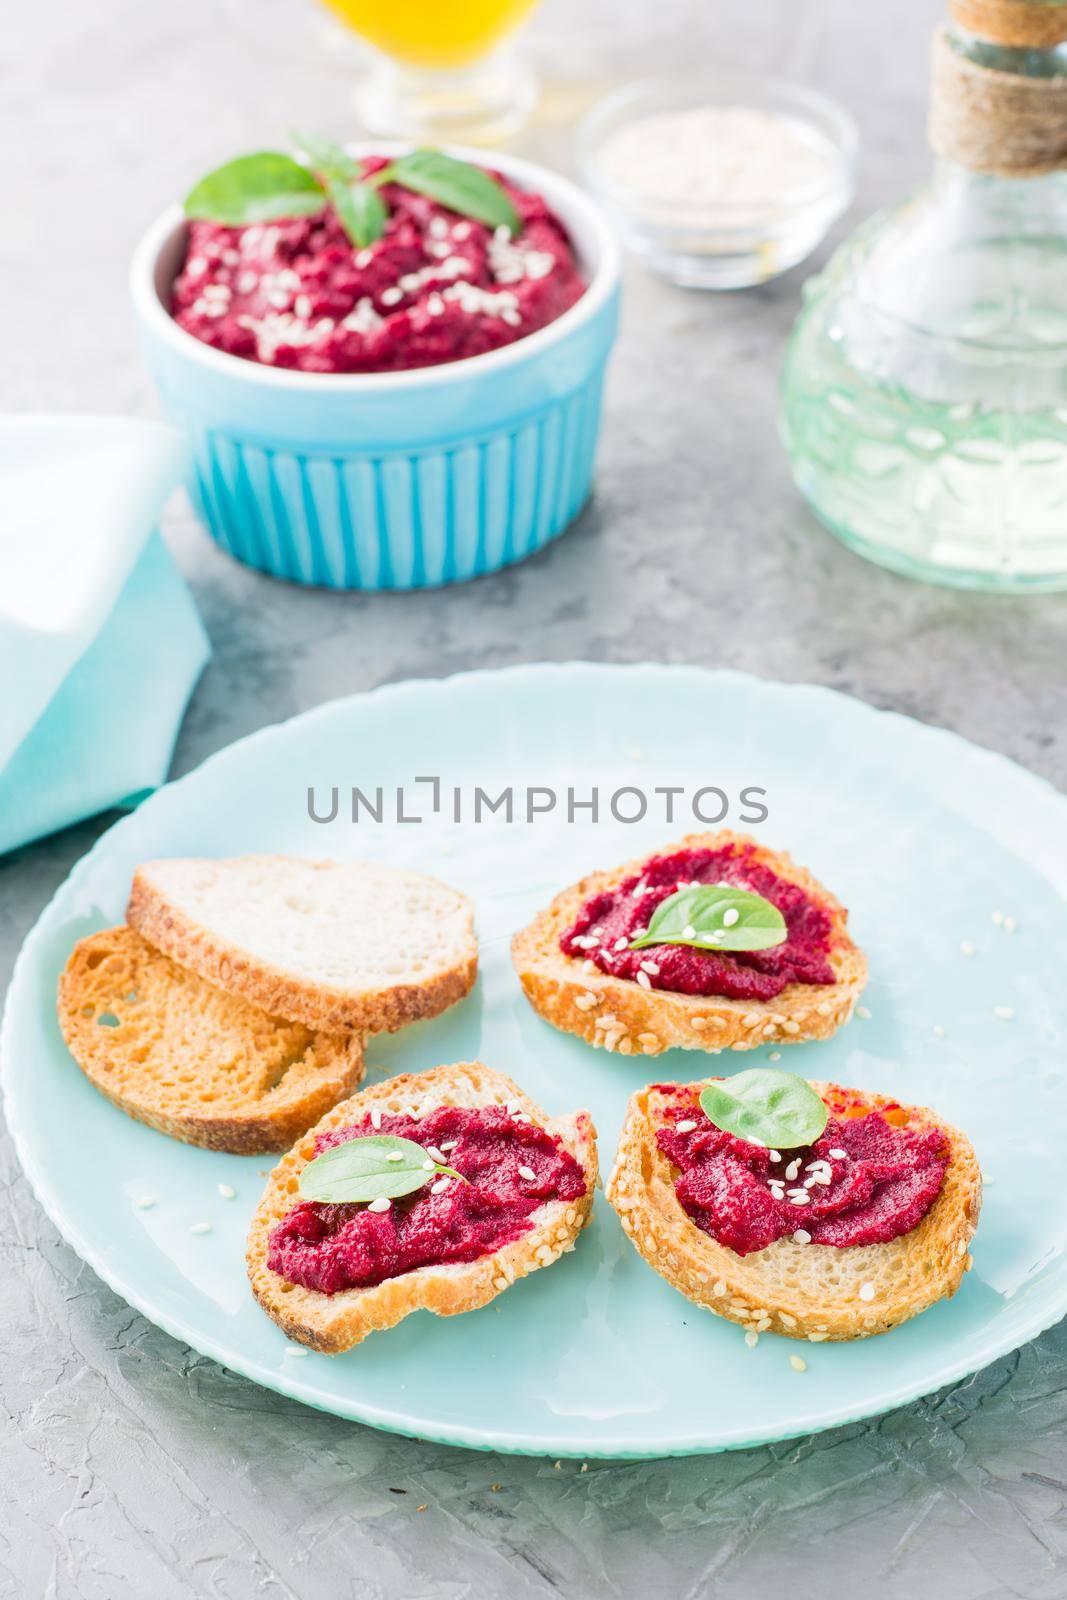 Homemade bruschetta with beetroot hummus on small baked baguette toast on a plate and a bowl of hummus on the table. Vertical view by Aleruana